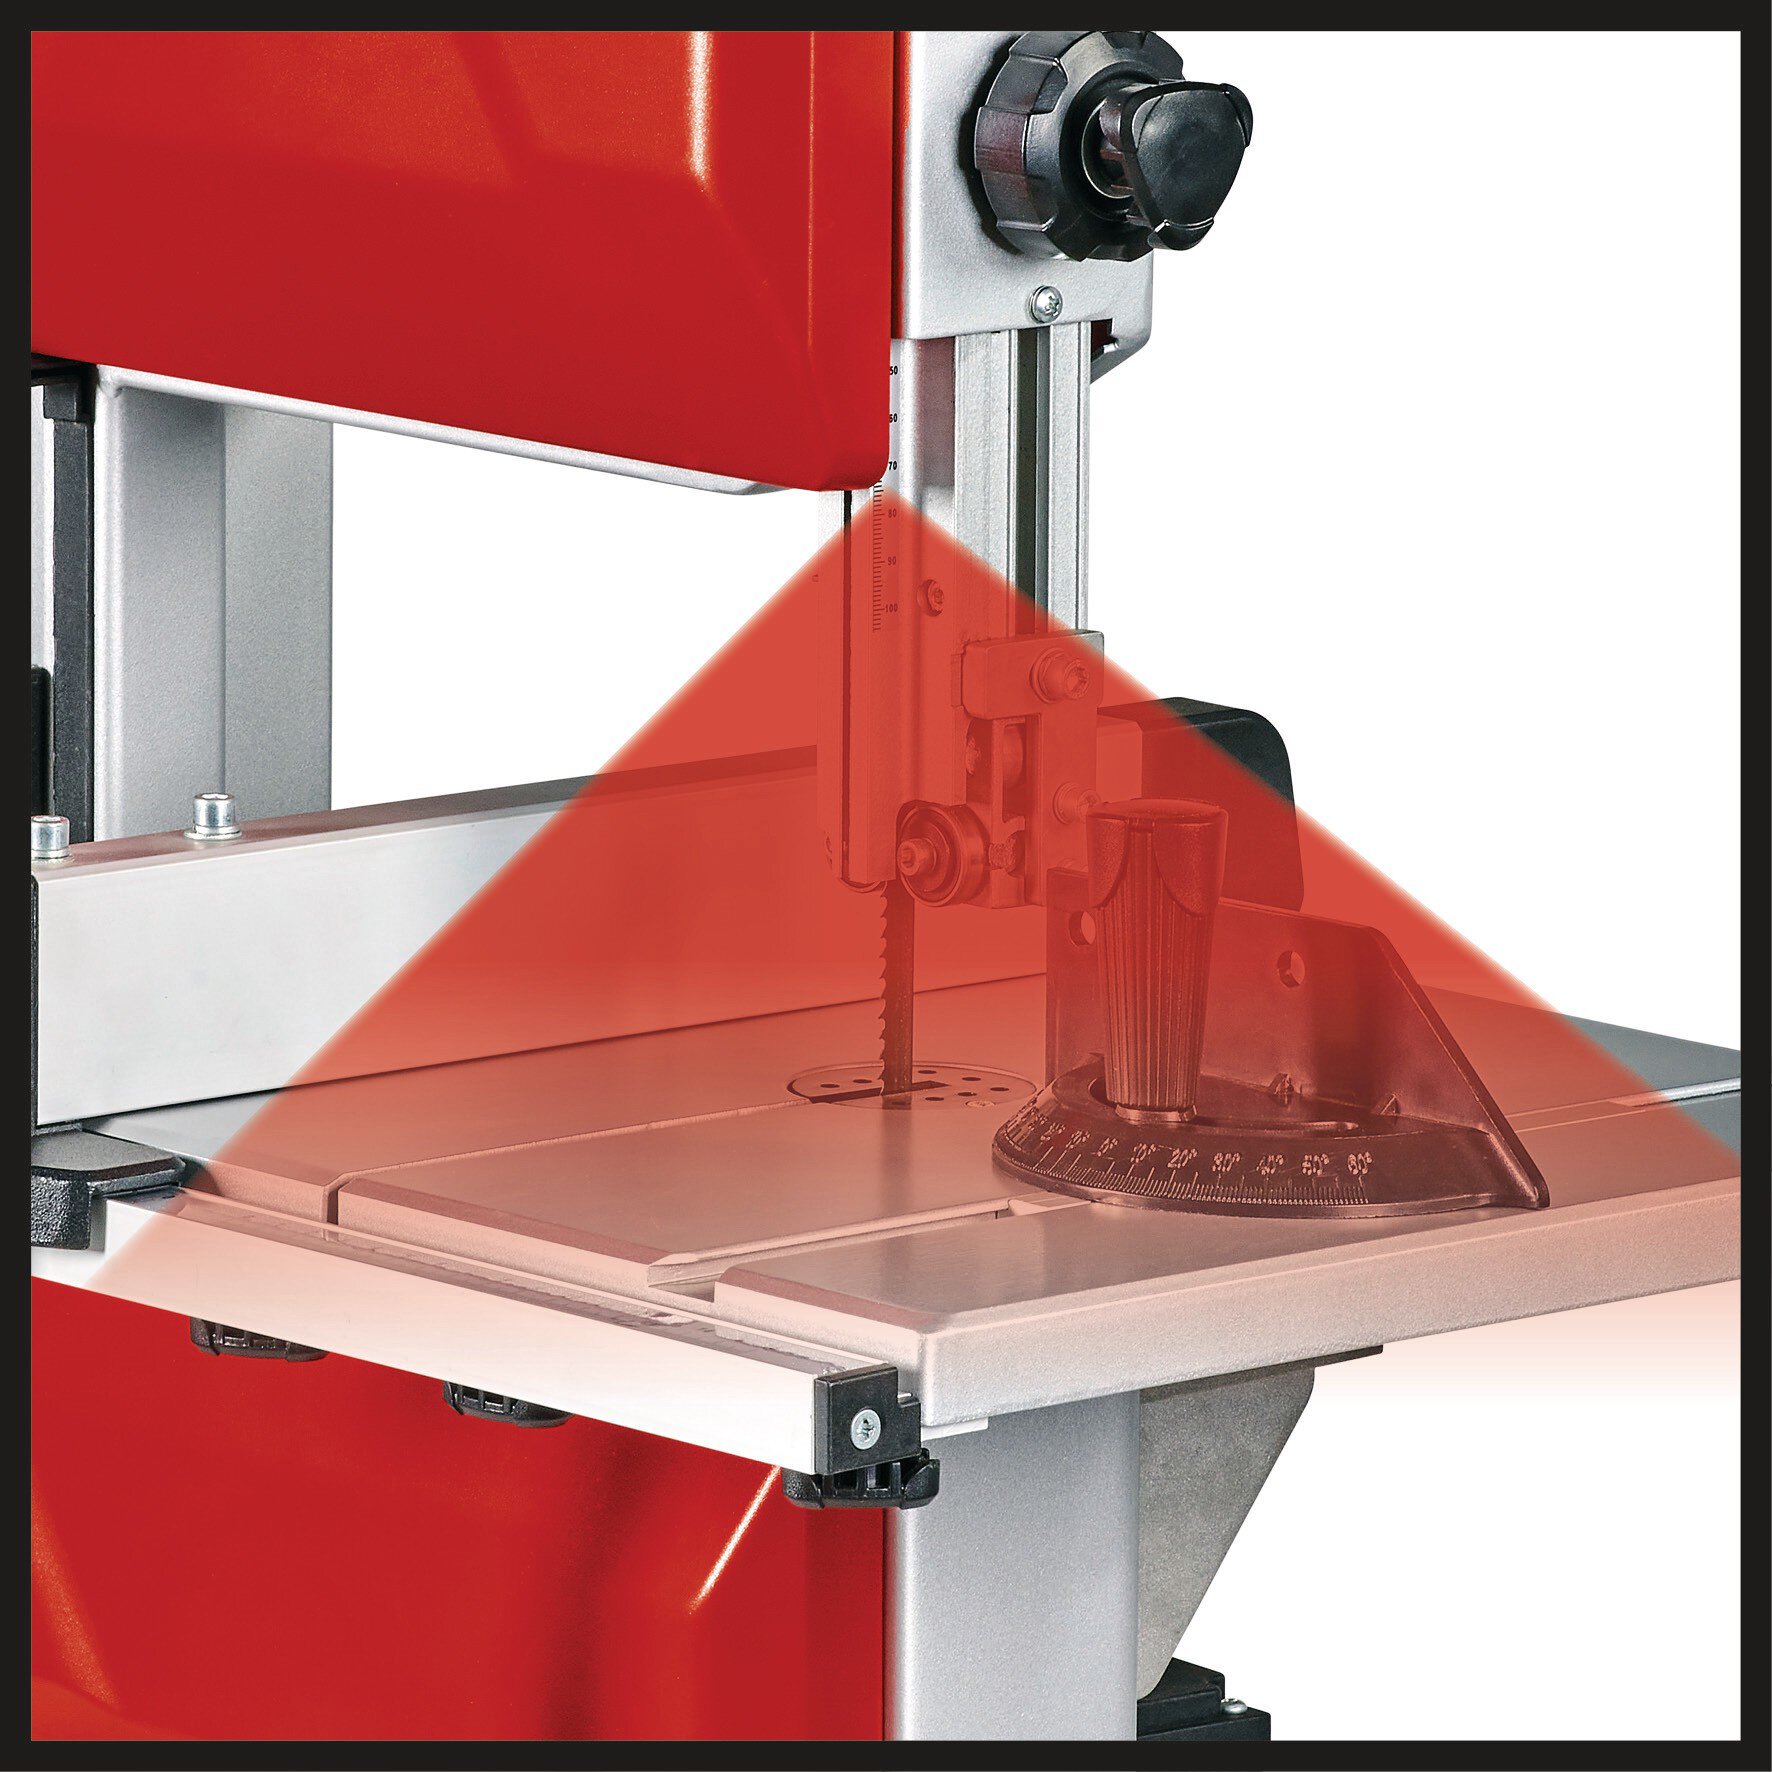 einhell-classic-band-saw-4308035-detail_image-102